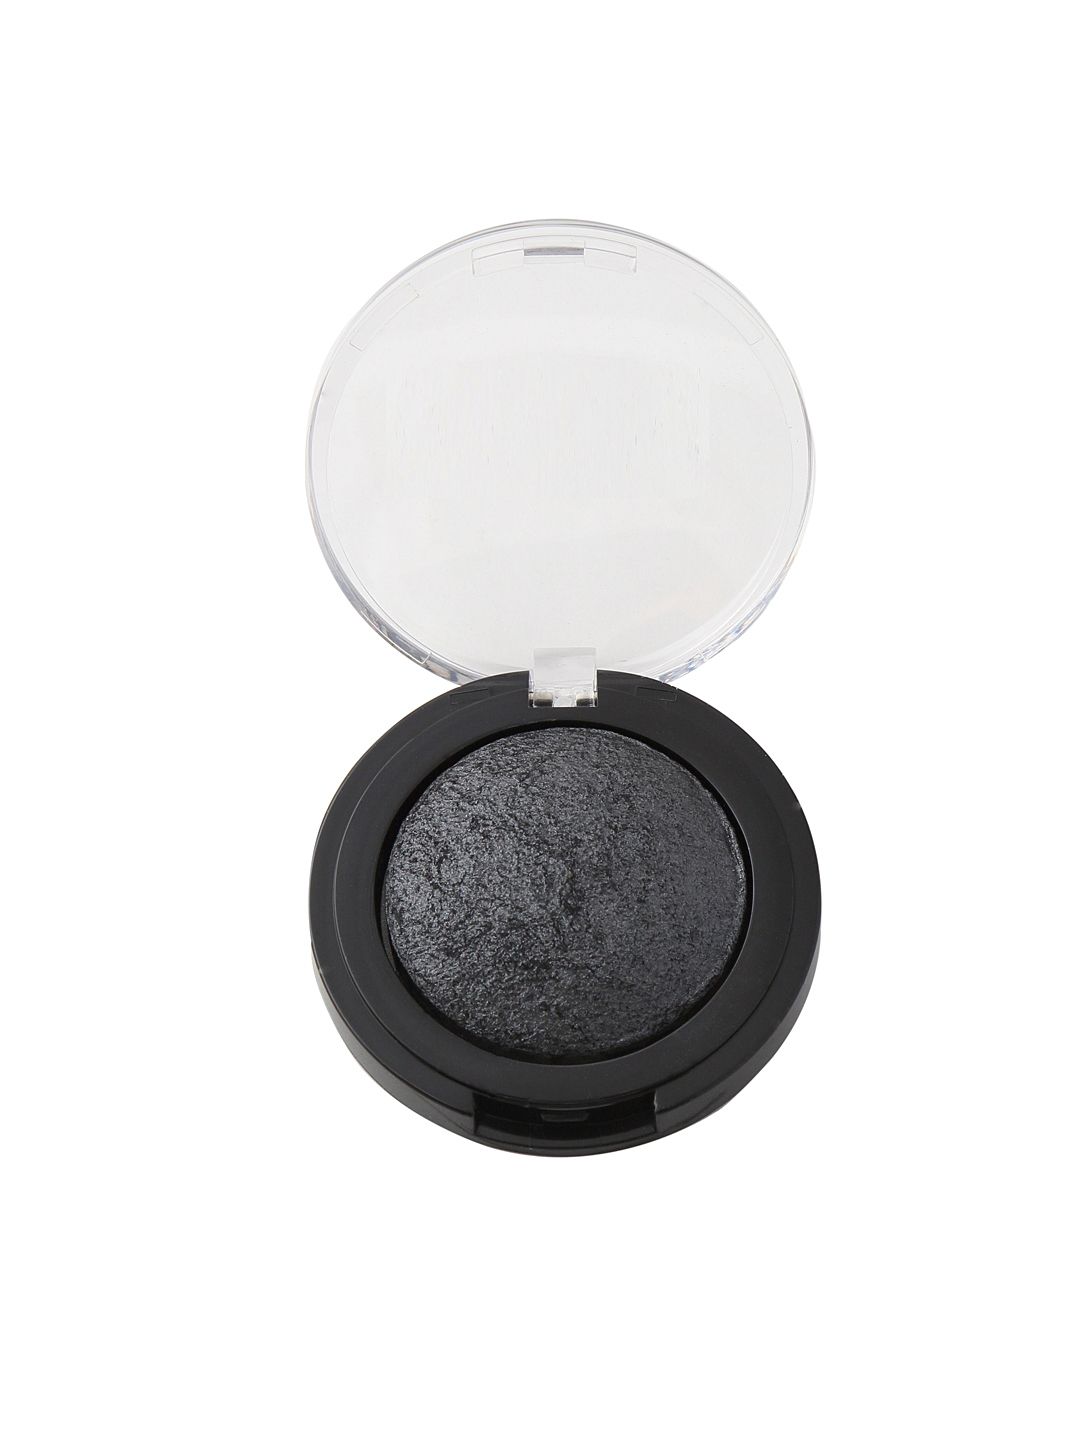 Miss Claire 10 Baked Eyeshadow Duo 3.5 g Price in India